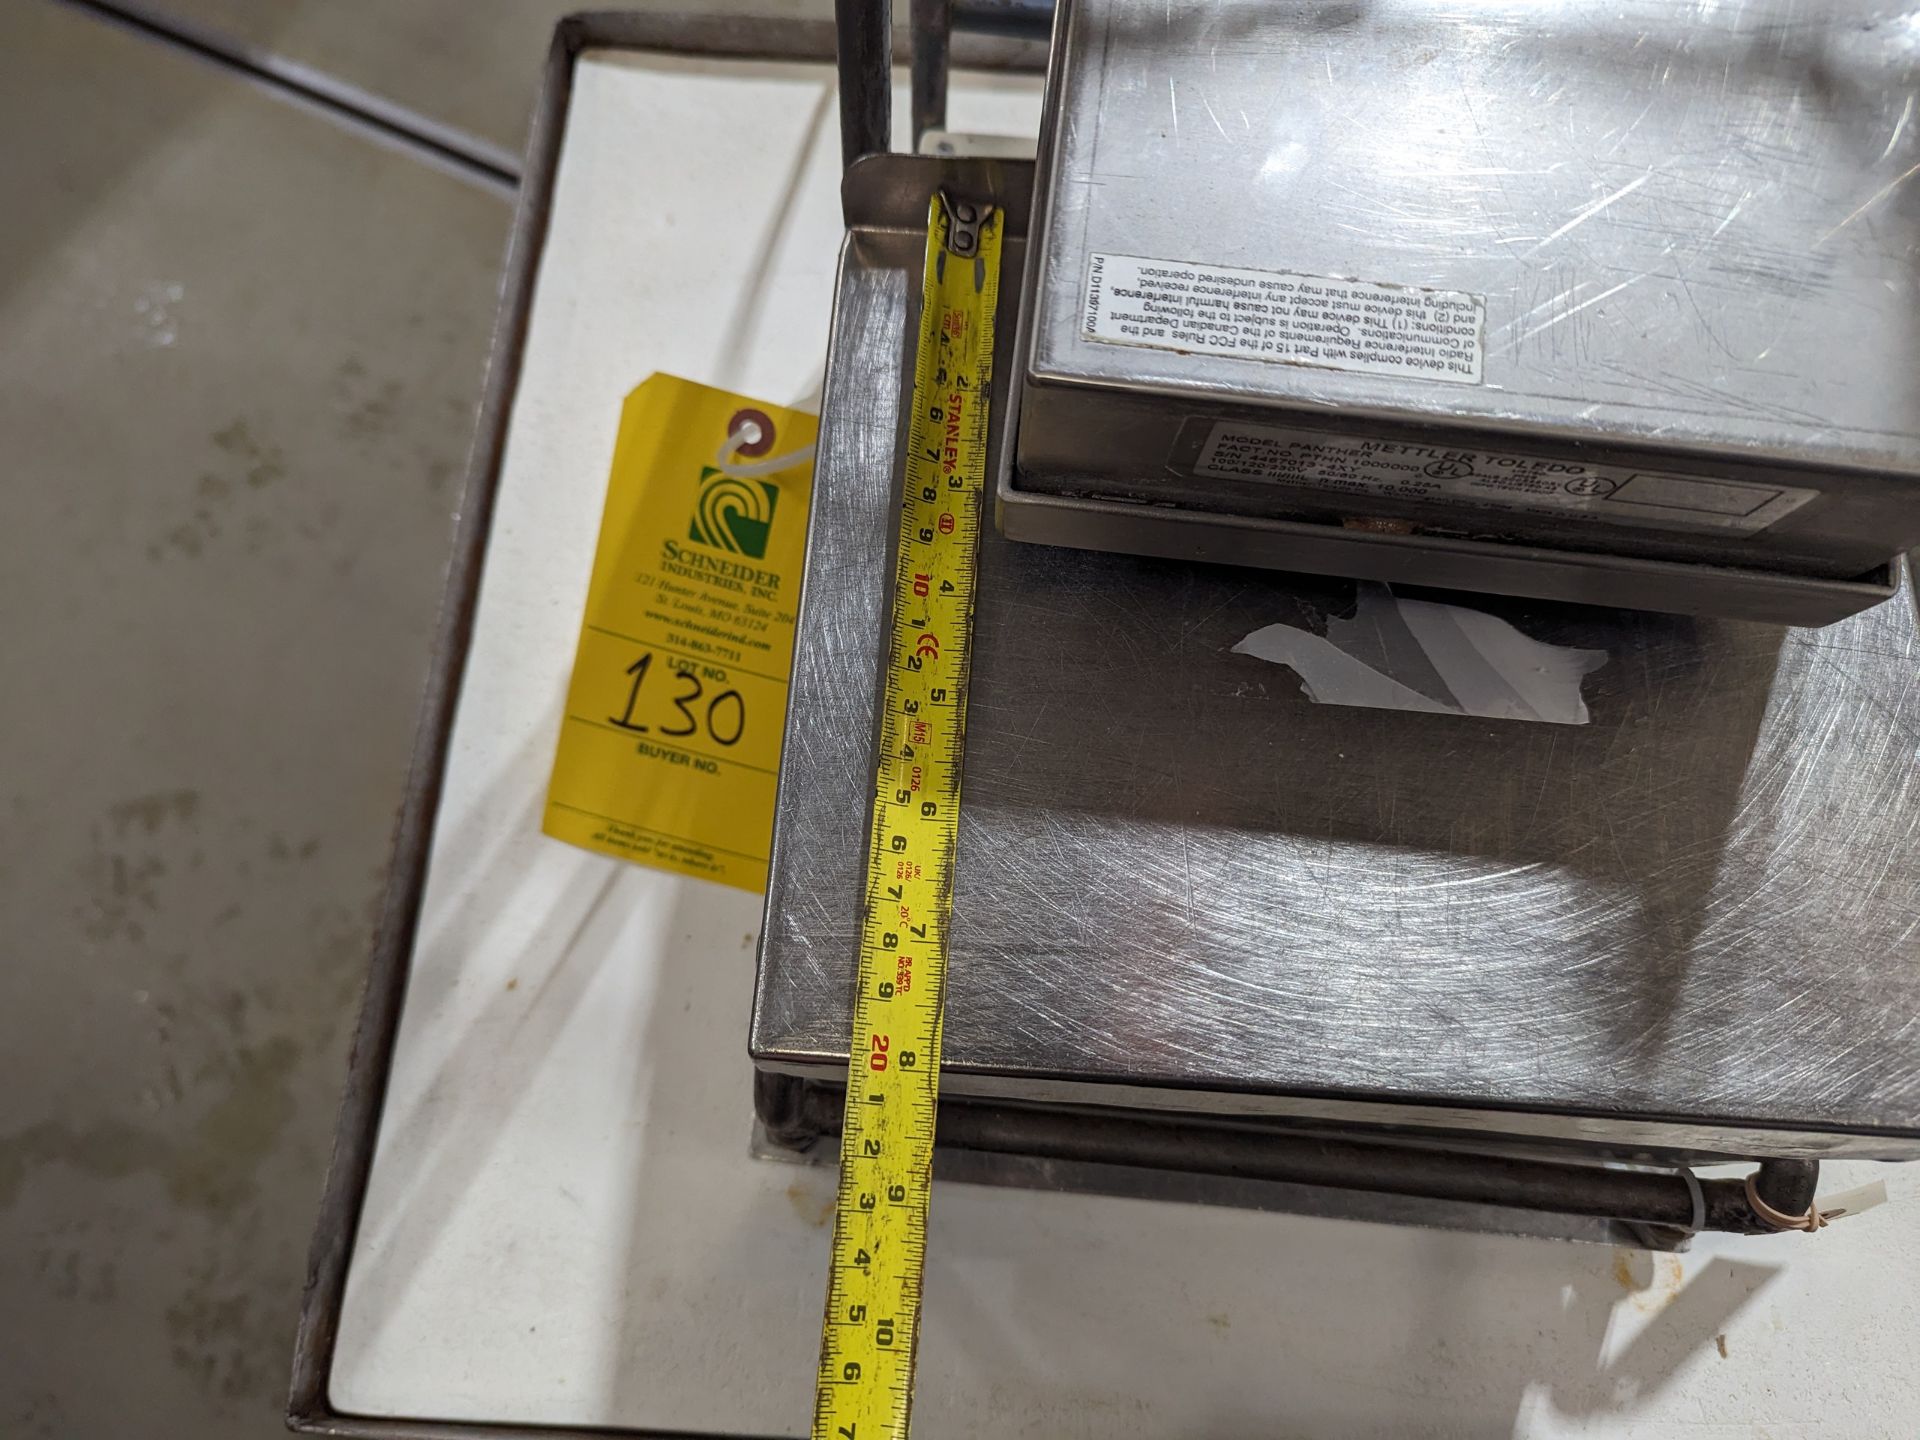 Mettler Toledo Panther 10 x 8 Bench Scale, Dimensions LxWxH: 10x12x19 - Image 5 of 5